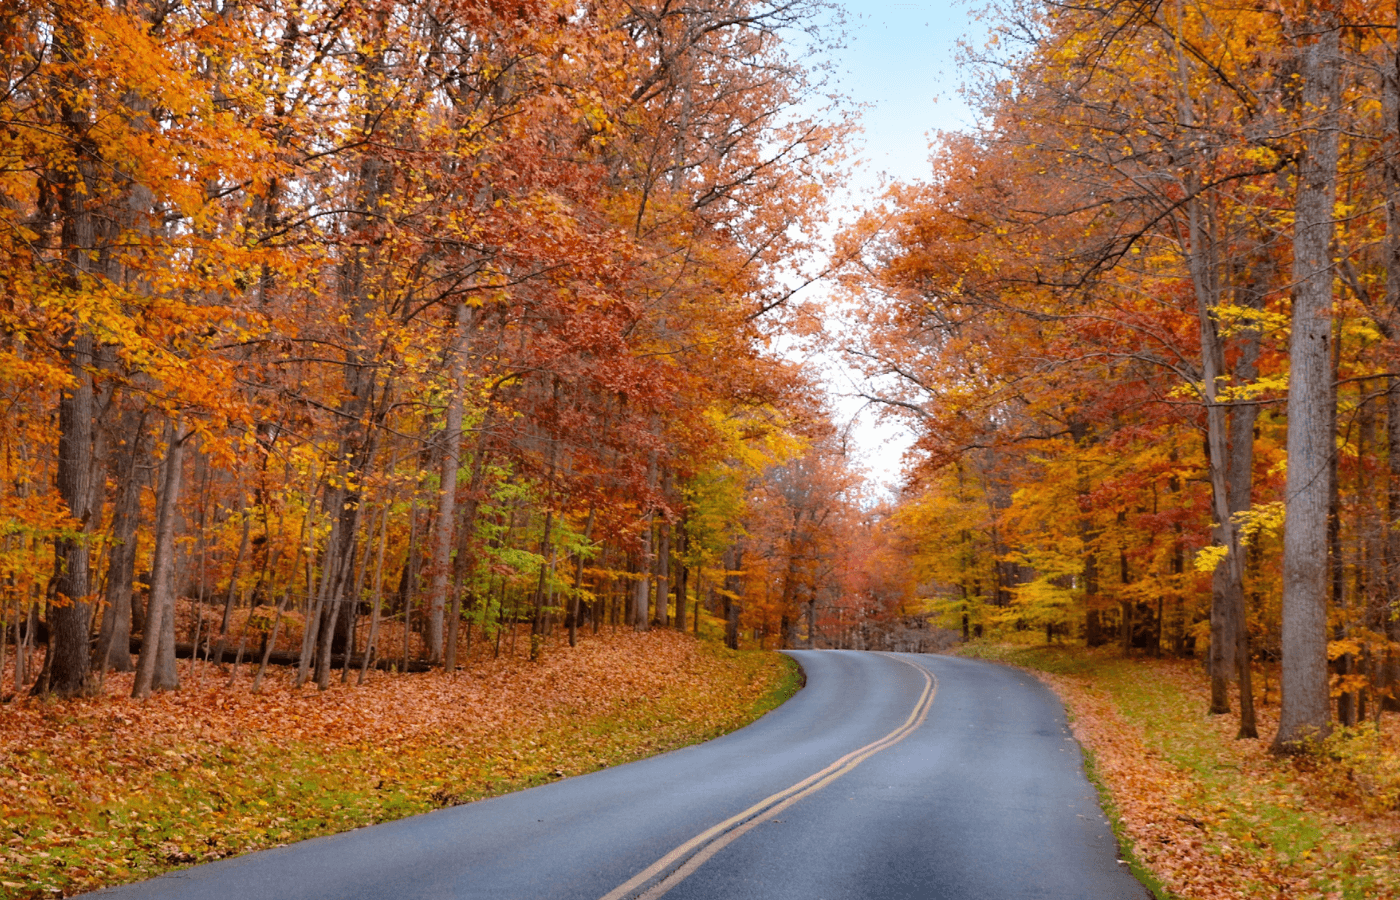 A windy road surrounded by trees with colorful fall leaves.